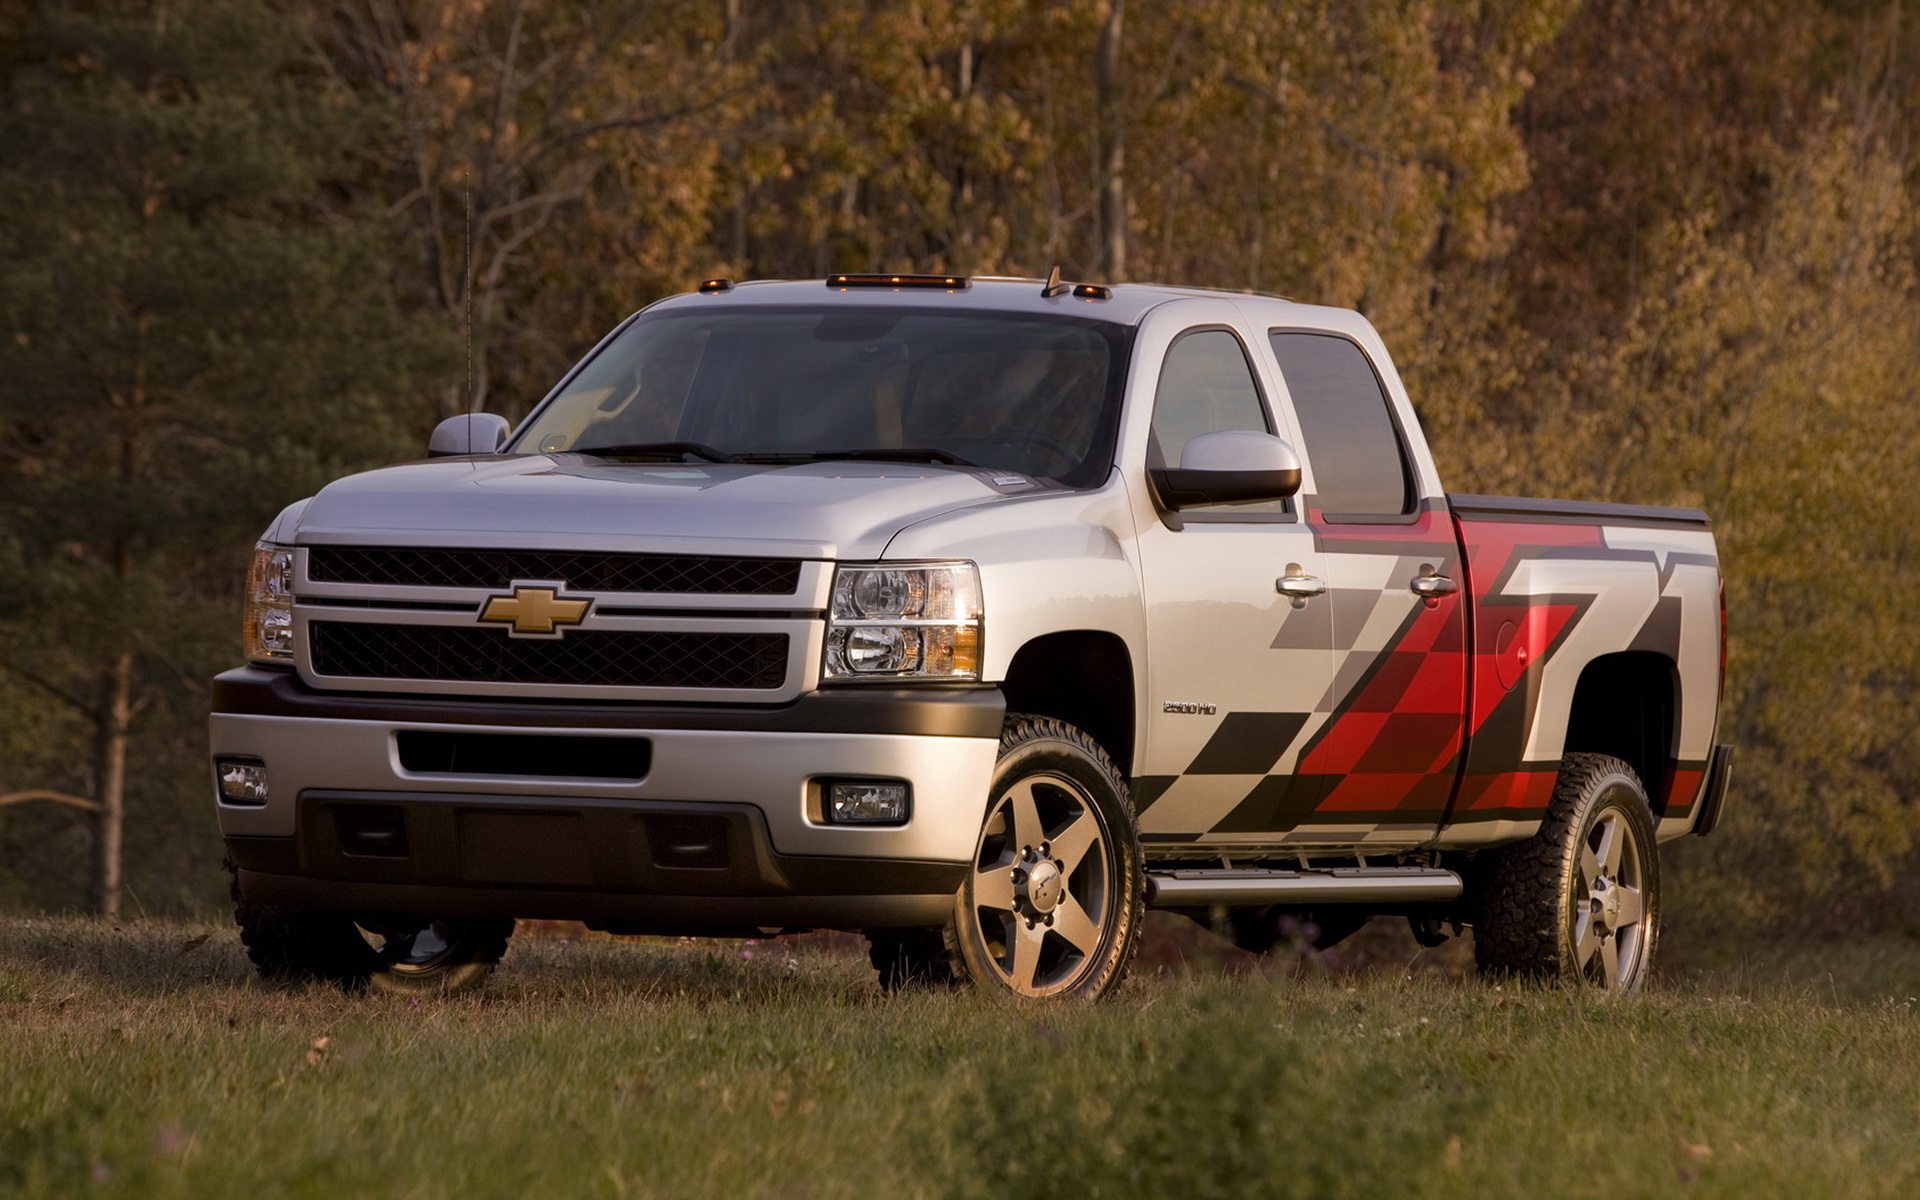 Chevrolet-Silverado-2500HD-Z71 wallpapers and images - wallpapers ...